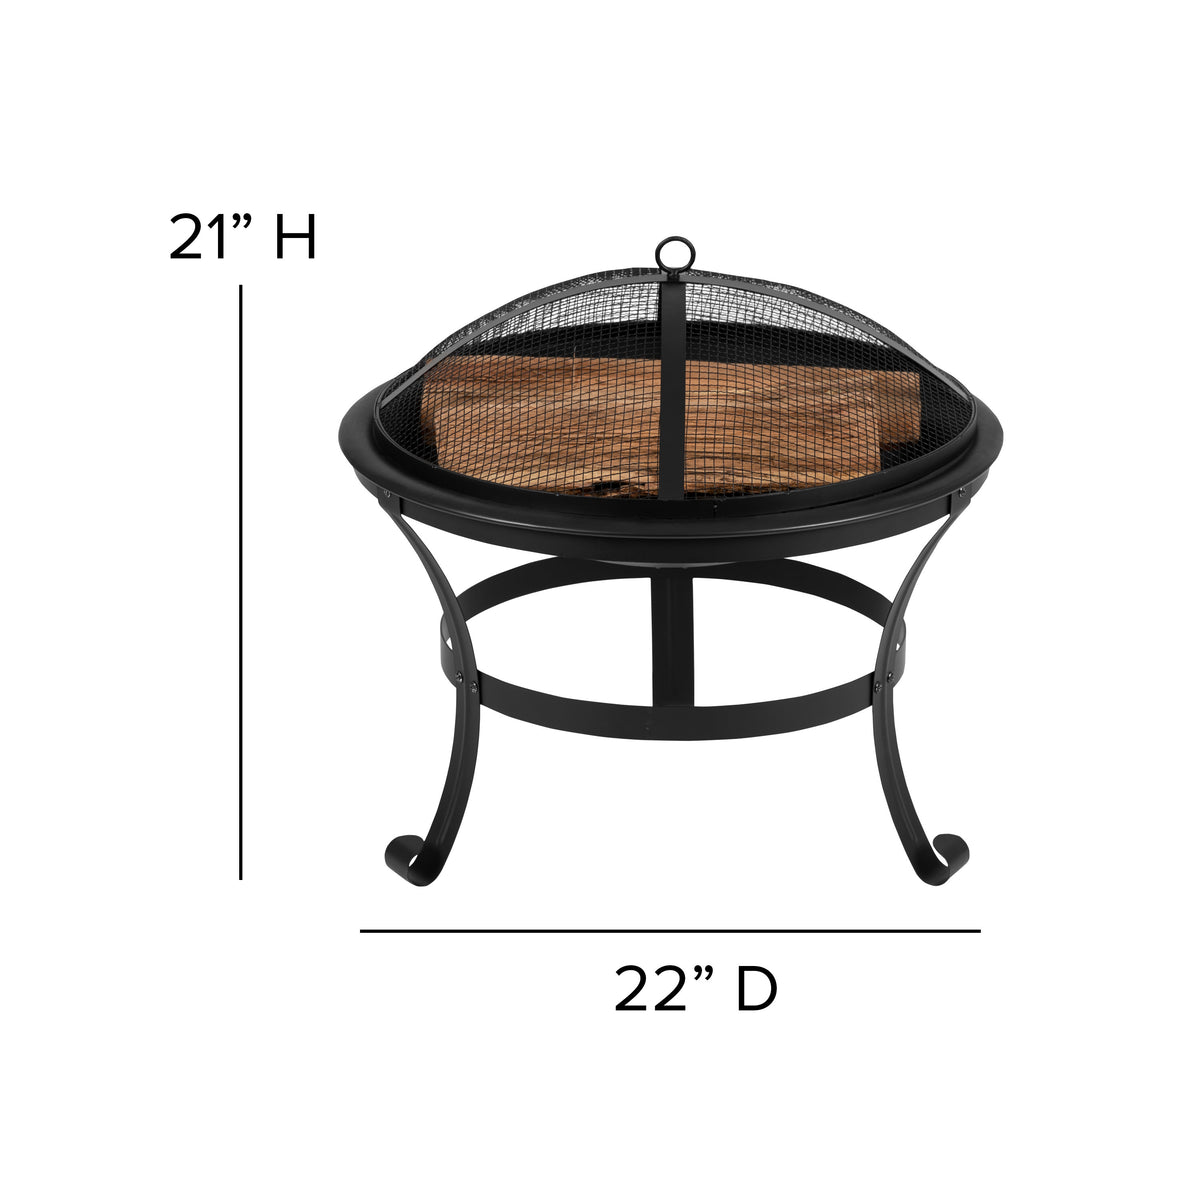 22inch Round Outdoor Portable Wood Burning Firepit with Mesh Spark Screen and Poker